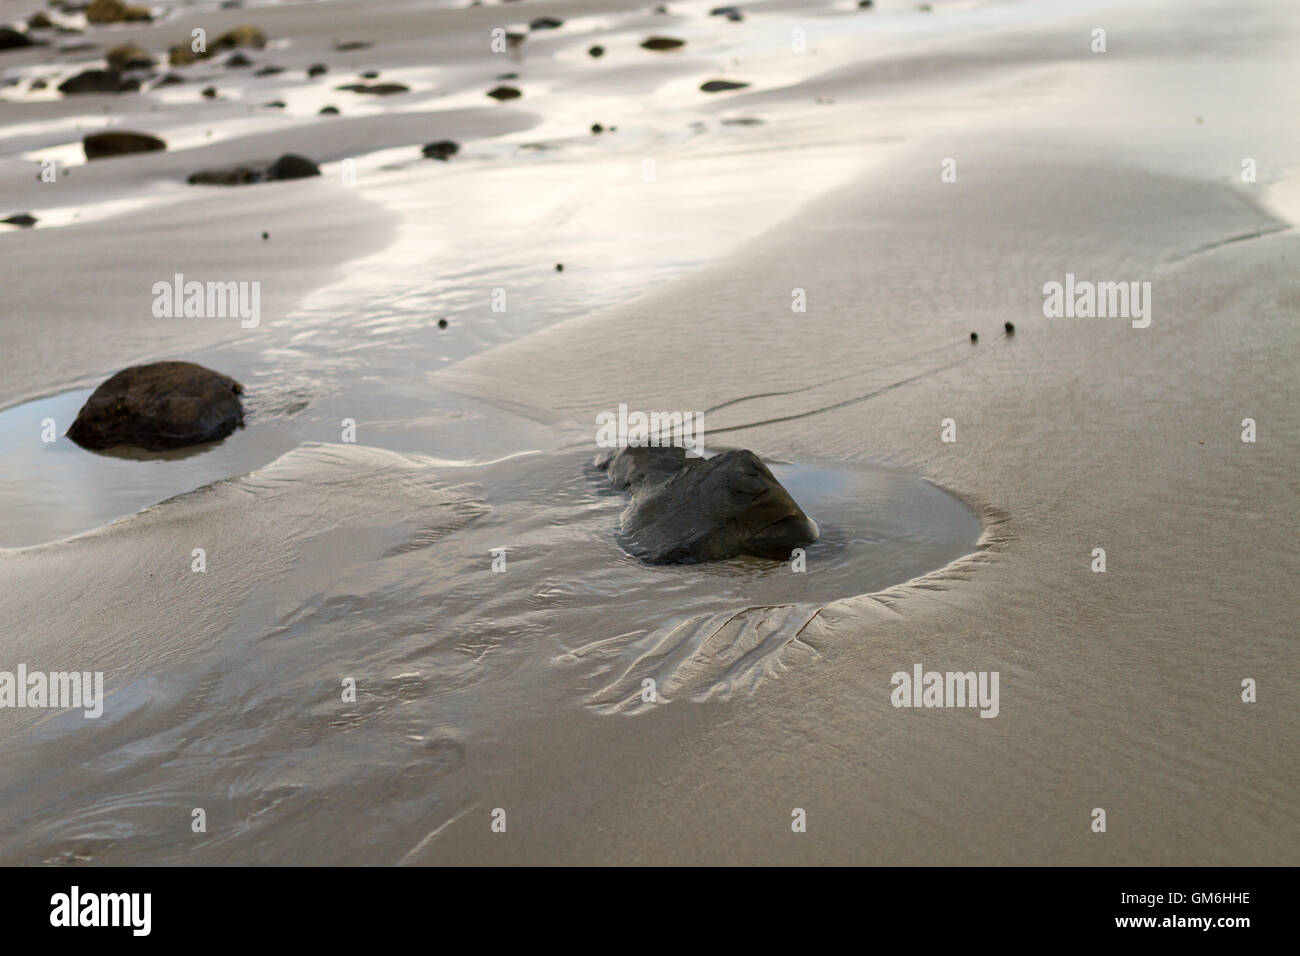 Ocean water pooling around rocks and wet sand at the beach Stock Photo